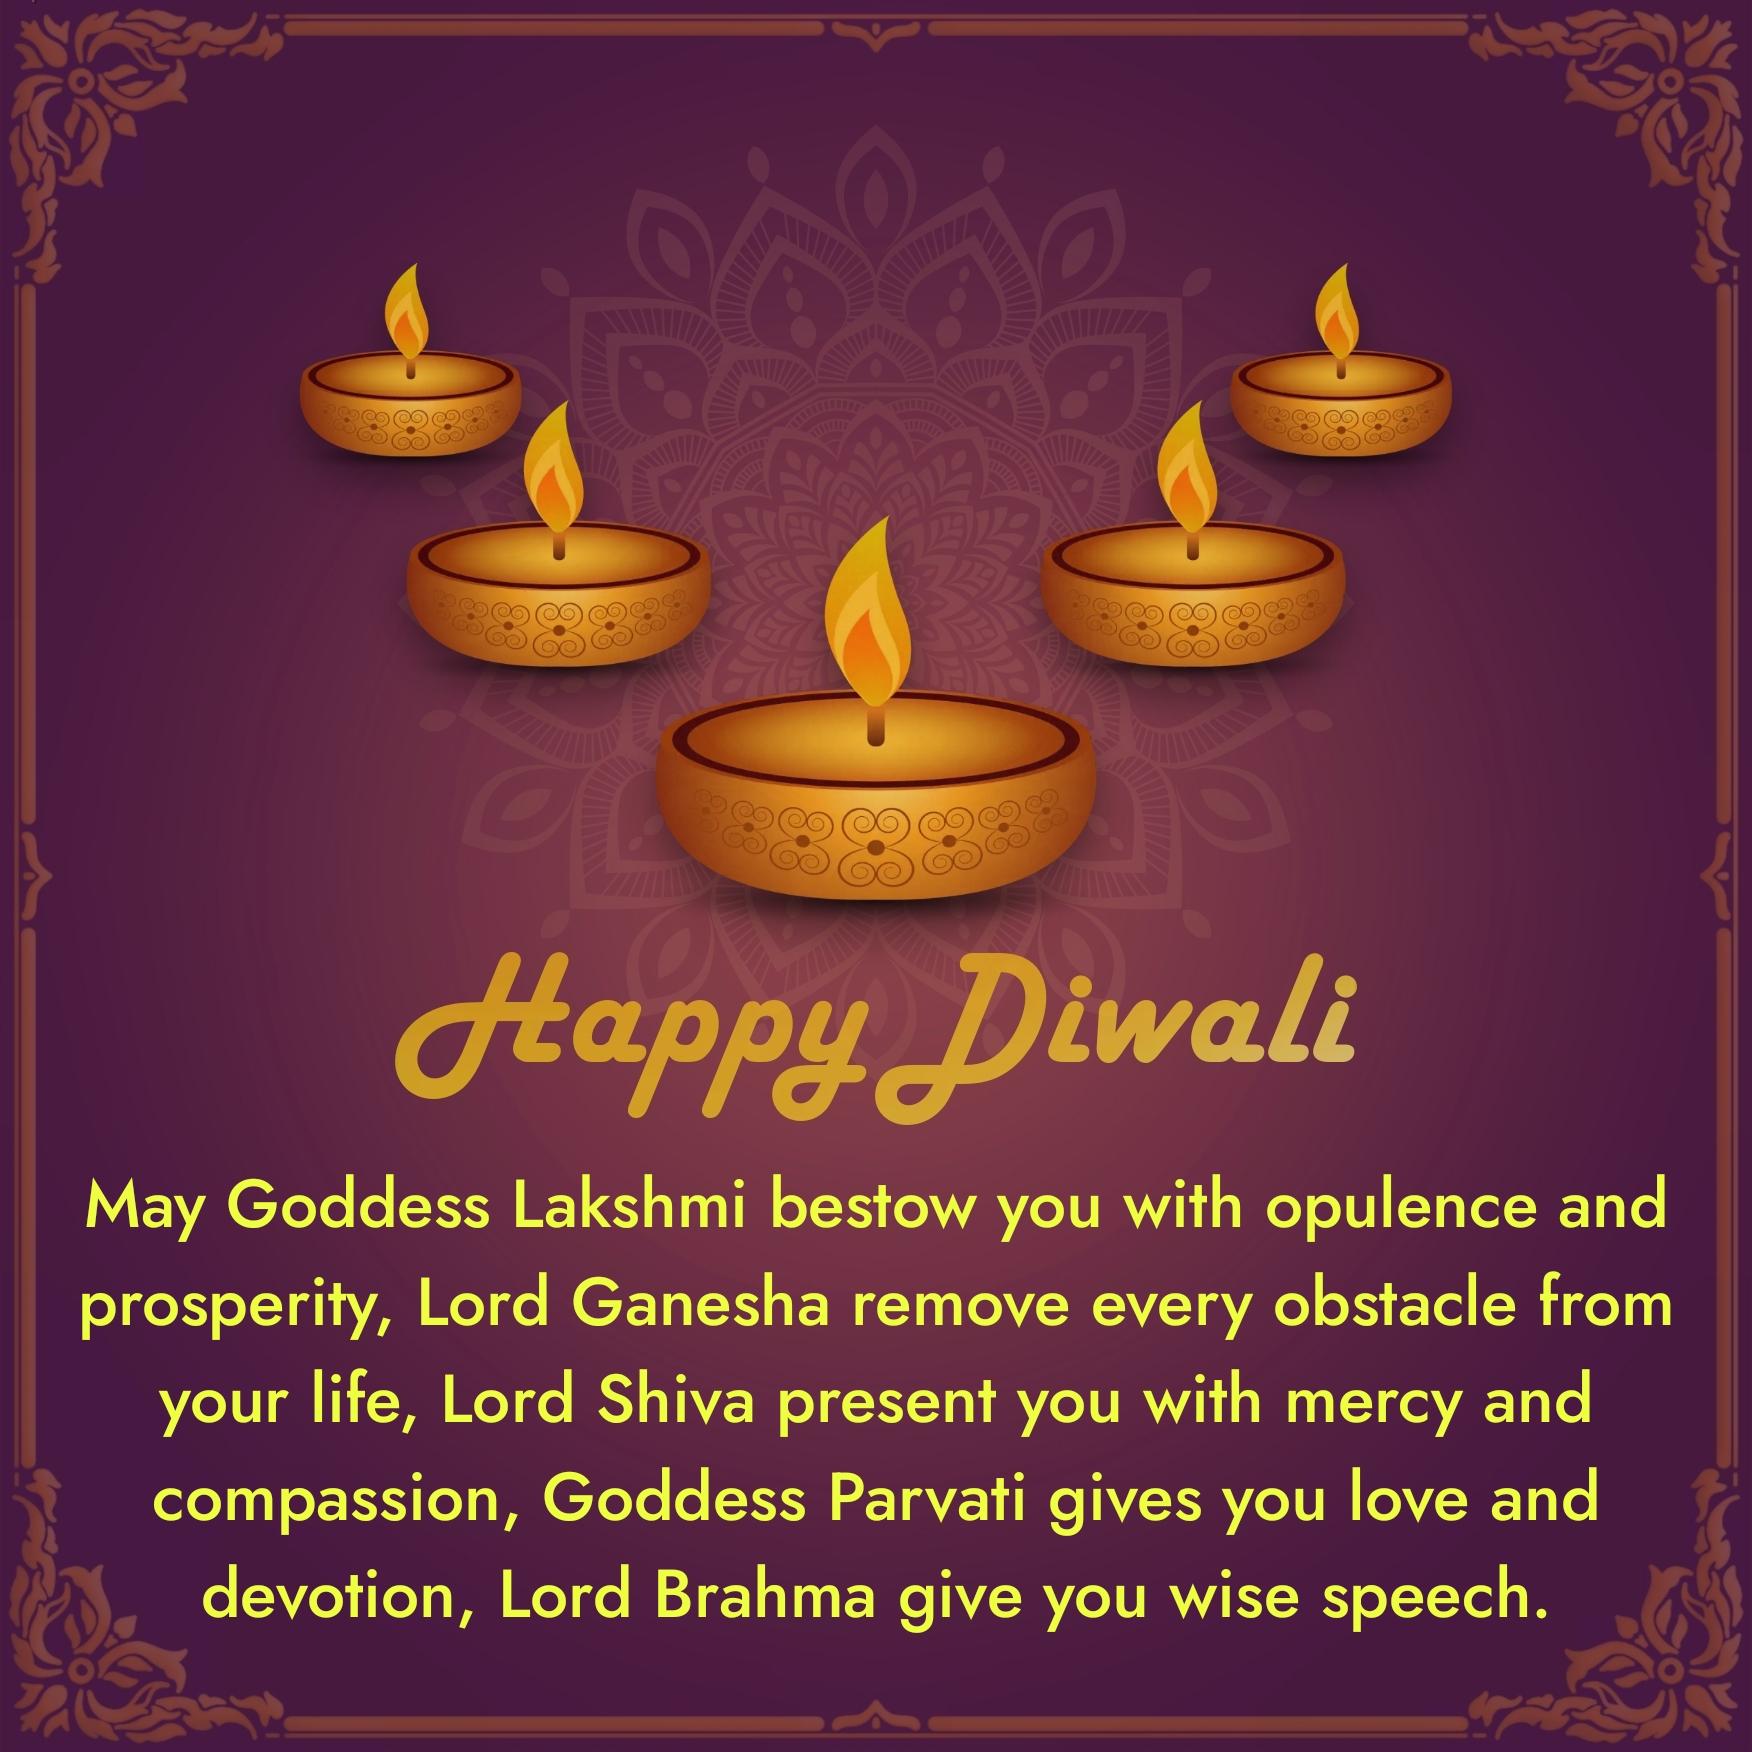 May Goddess Lakshmi bestow you with opulence and prosperity